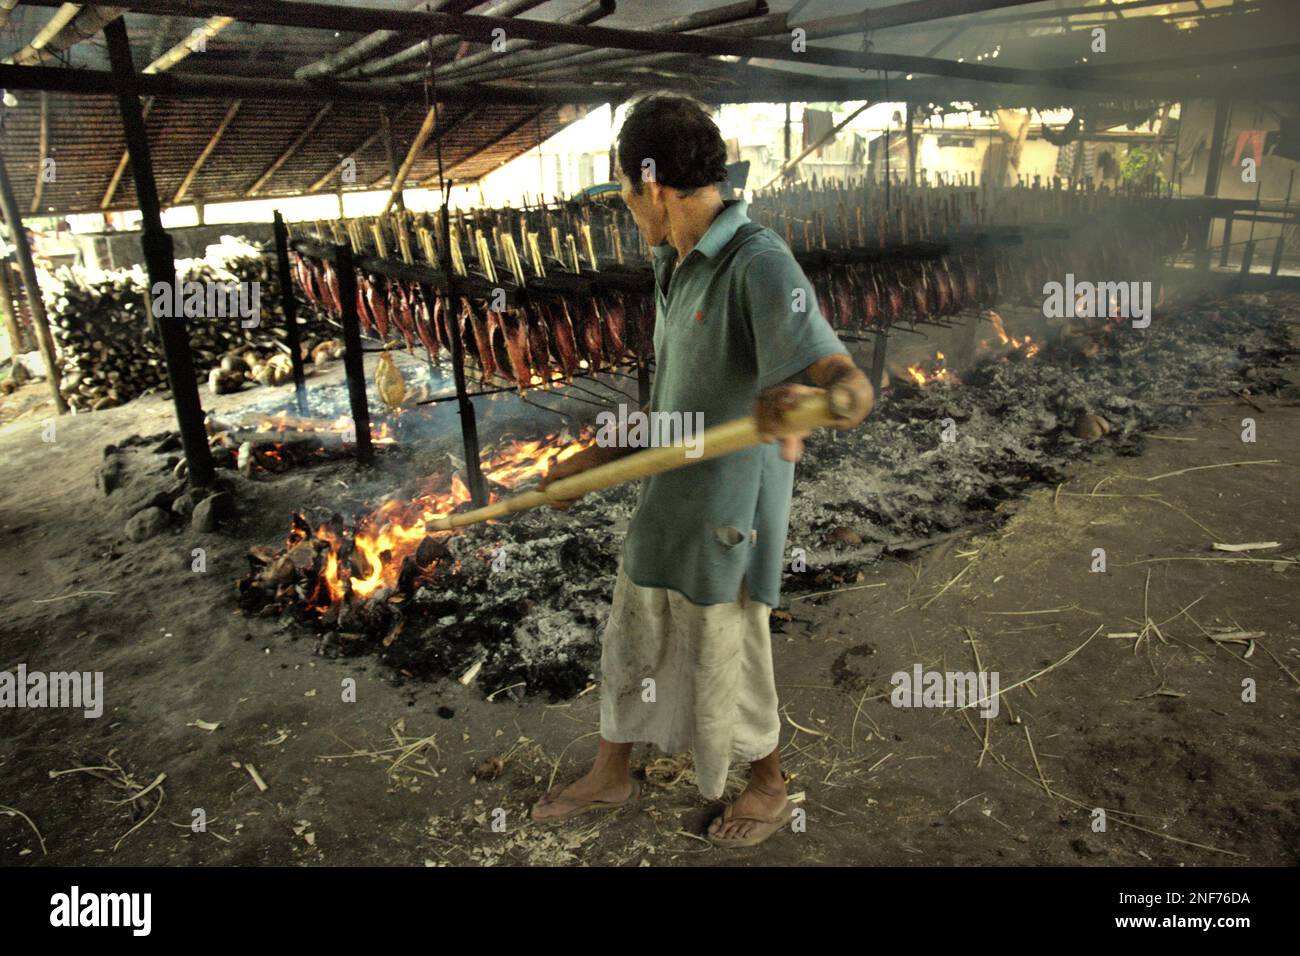 A worker is maintaining the distribution of coconut husk burning that is used as fuel to smoke skipjack tuna meats at a home industry in Bitung, North Sulawesi, Indonesia. Popularly known as 'cakalang fufu', the smoked tuna fish is considered an 'exotic indigenous food', a part of skipjack tuna fish production that is one of the most important economic activities in Bitung City area, one of the Indonesia's outer rings of fishing ports connected to Pacific Ocean. According to FAO in their latest report called The State of World Fisheries and Aquaculture 2022, Indonesia is the third largest... Stock Photo